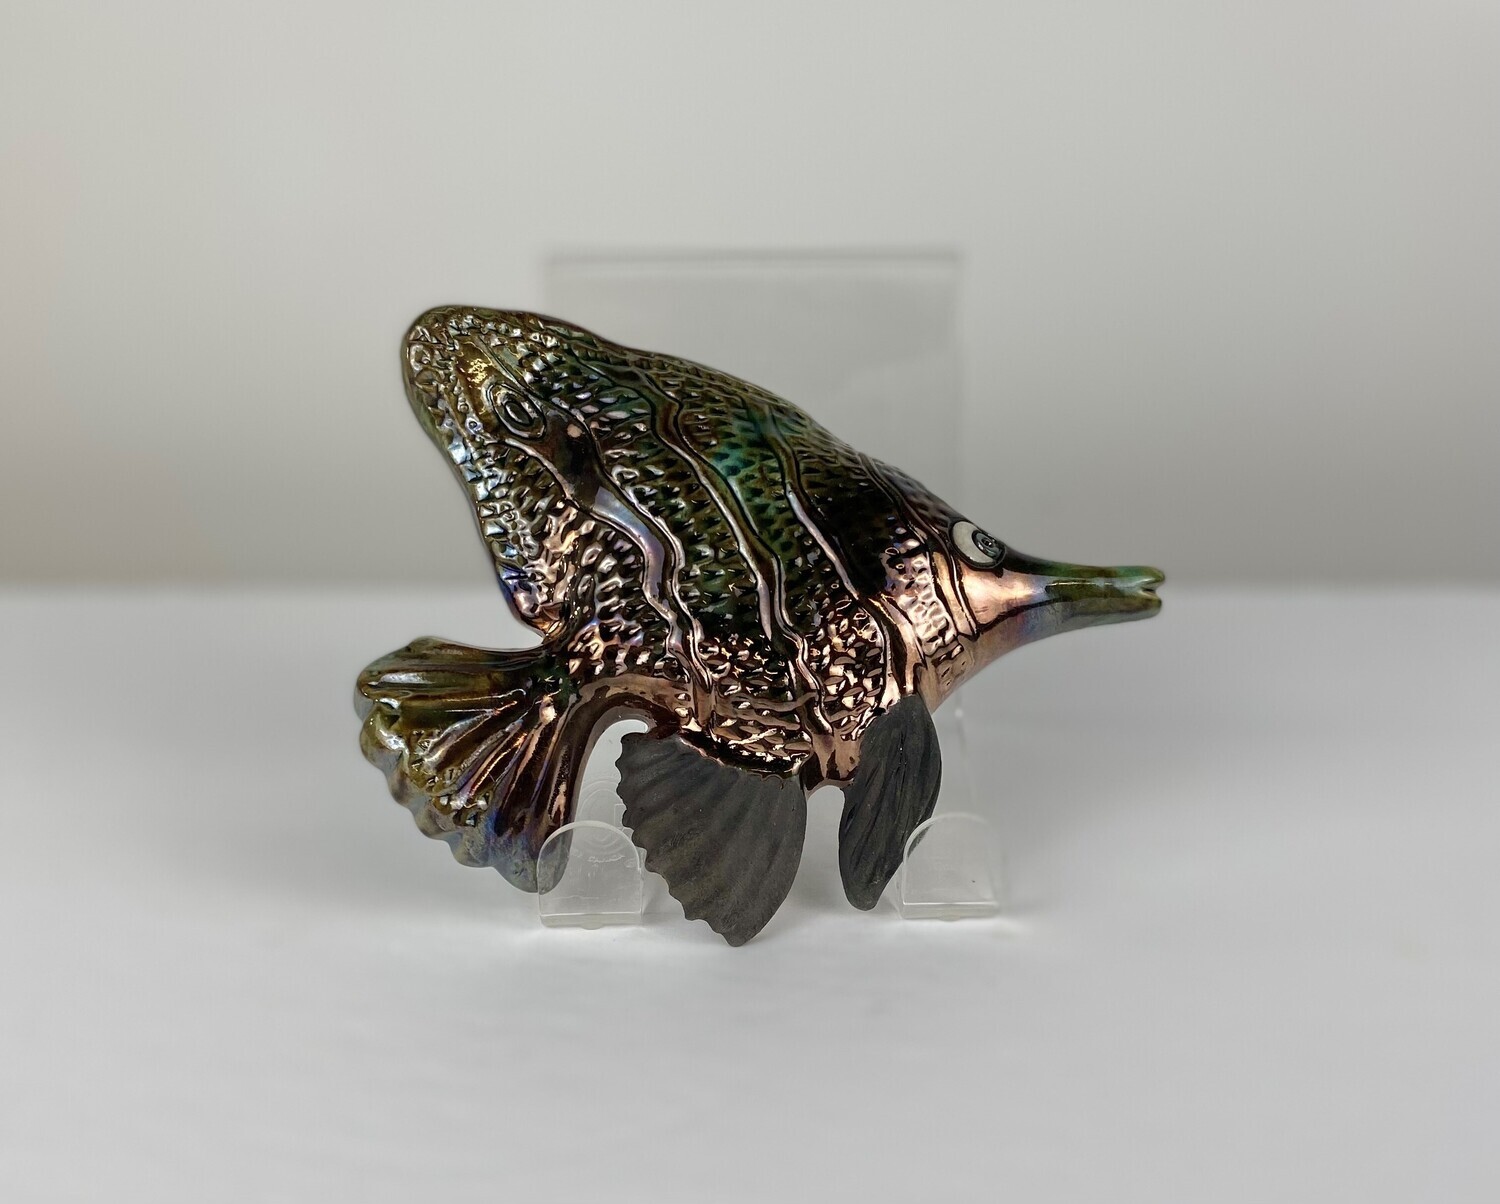 Small Needle Nose Pottery Fish